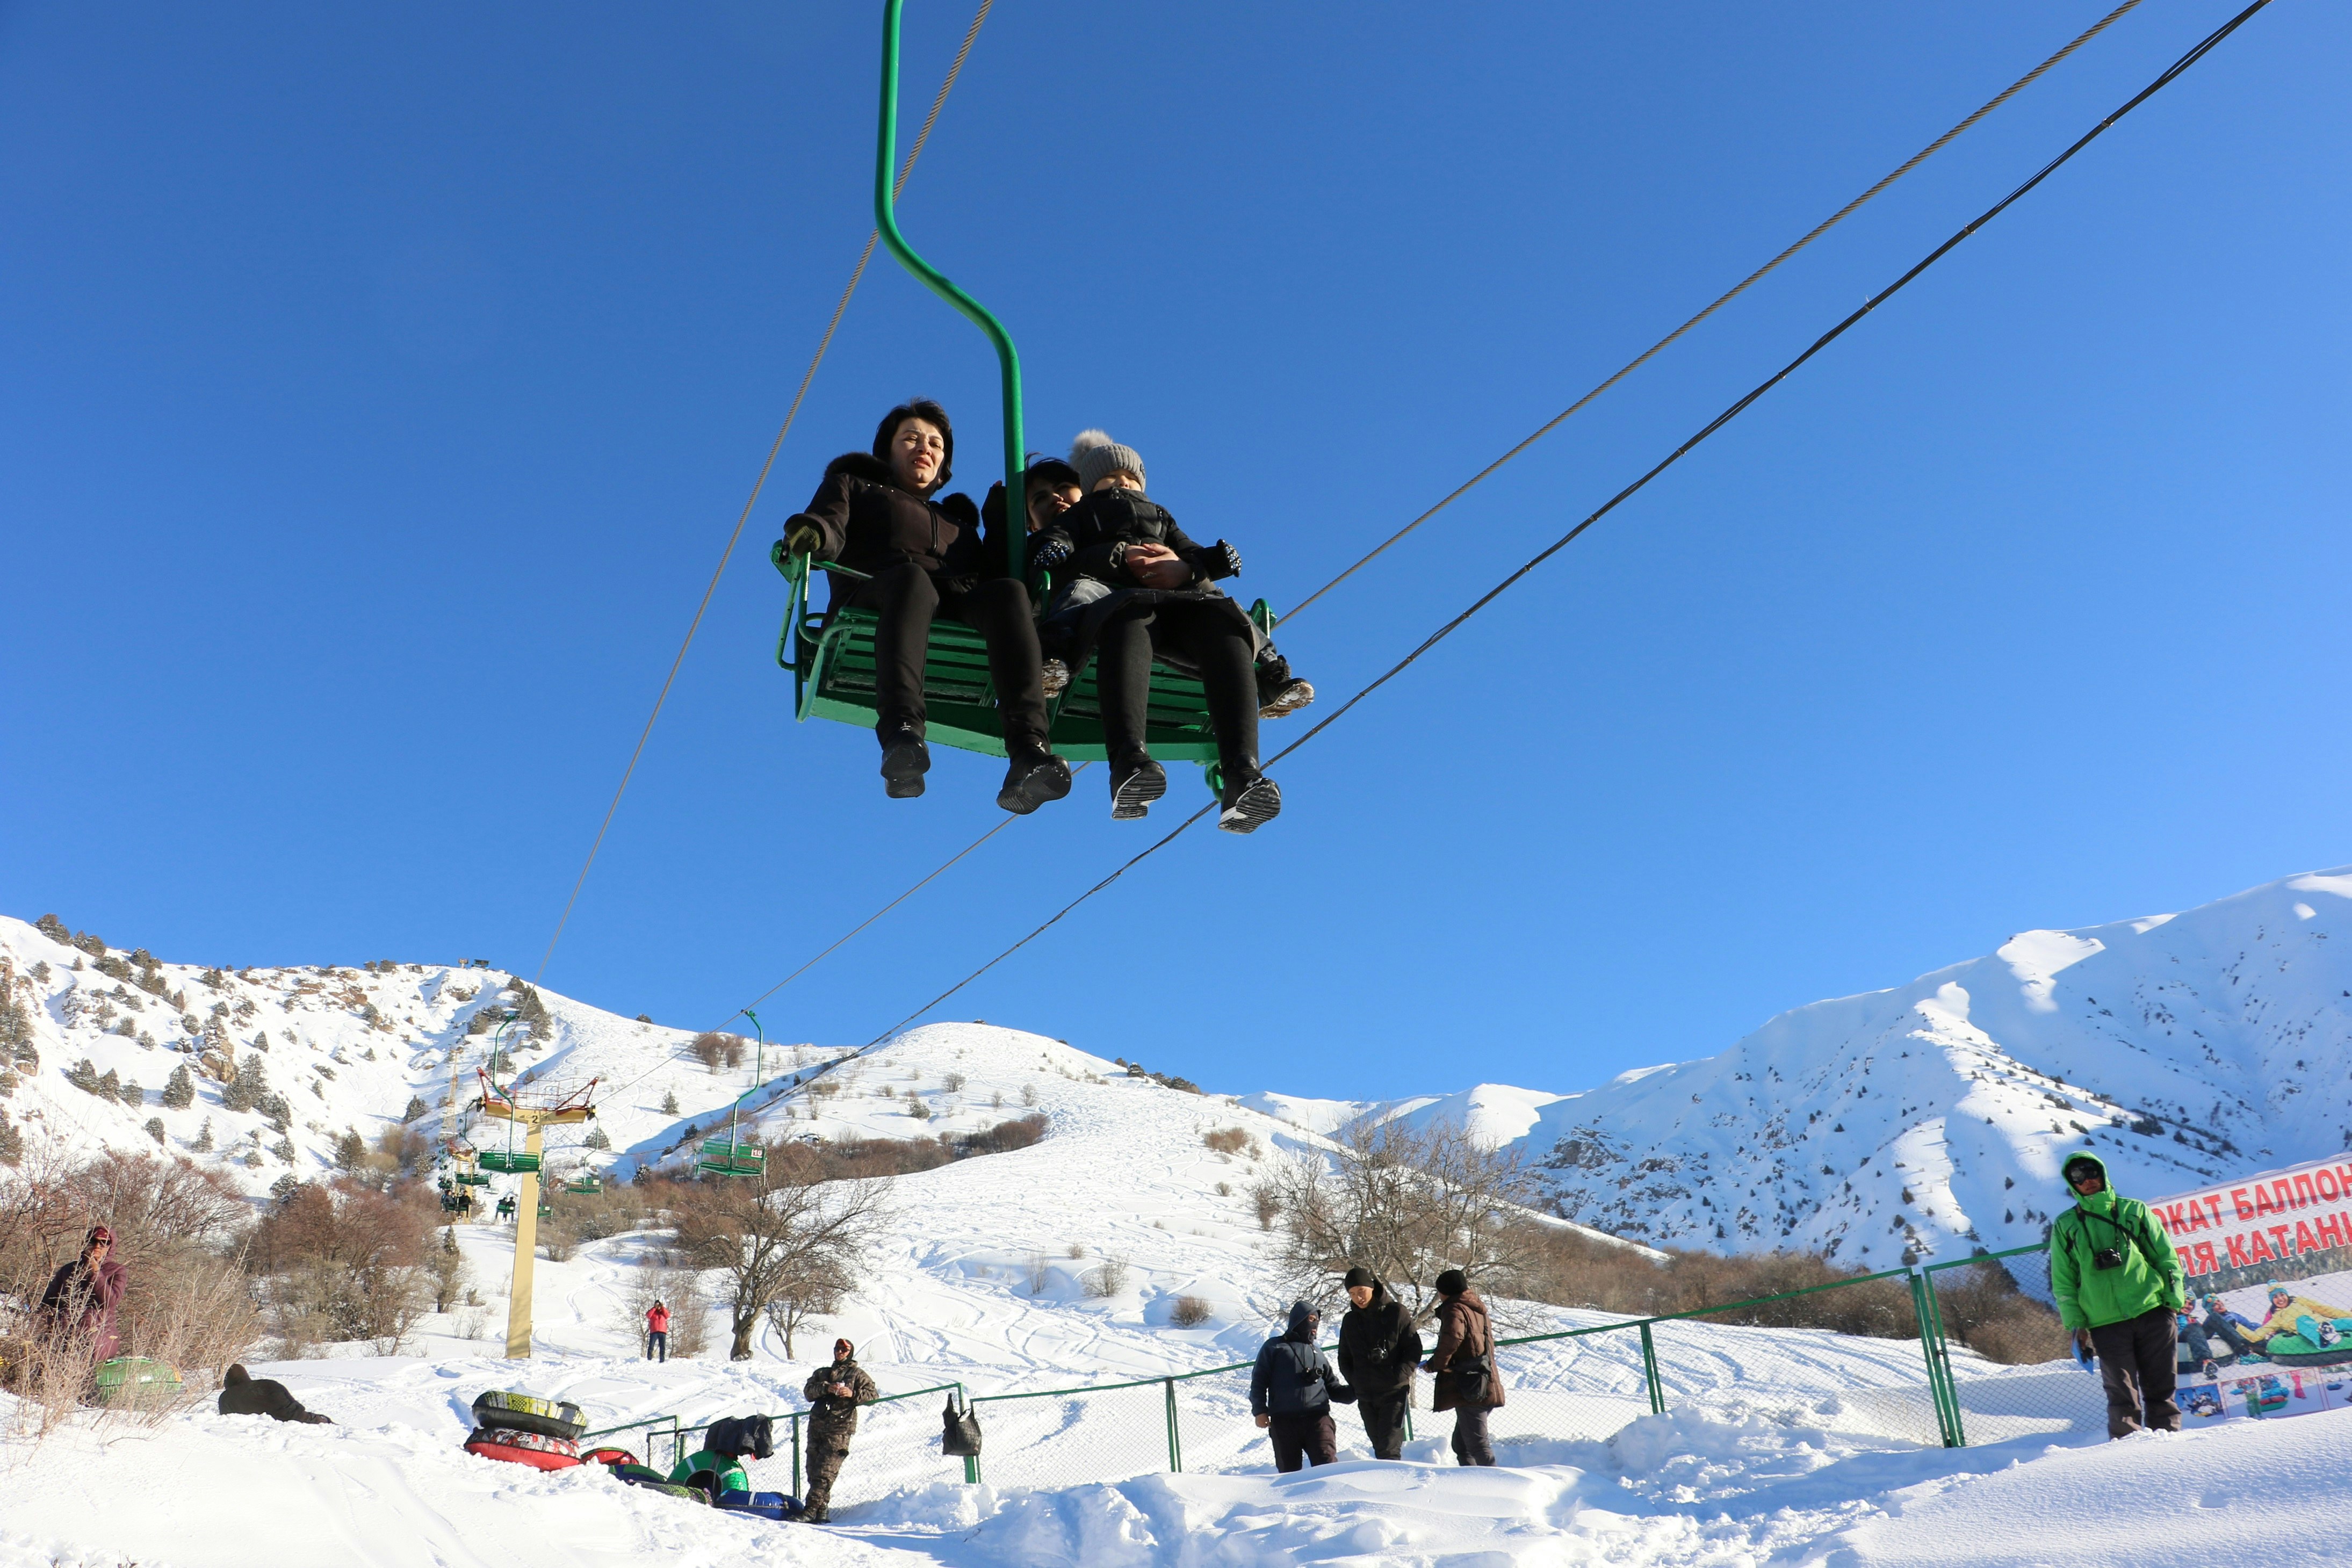 Three people (two adults and a child) ride in a chairlift at the Chimgan ski resort in Uzbekistan. The surrounding scenery is blanketed in snow and the sky is clear blue in the background.